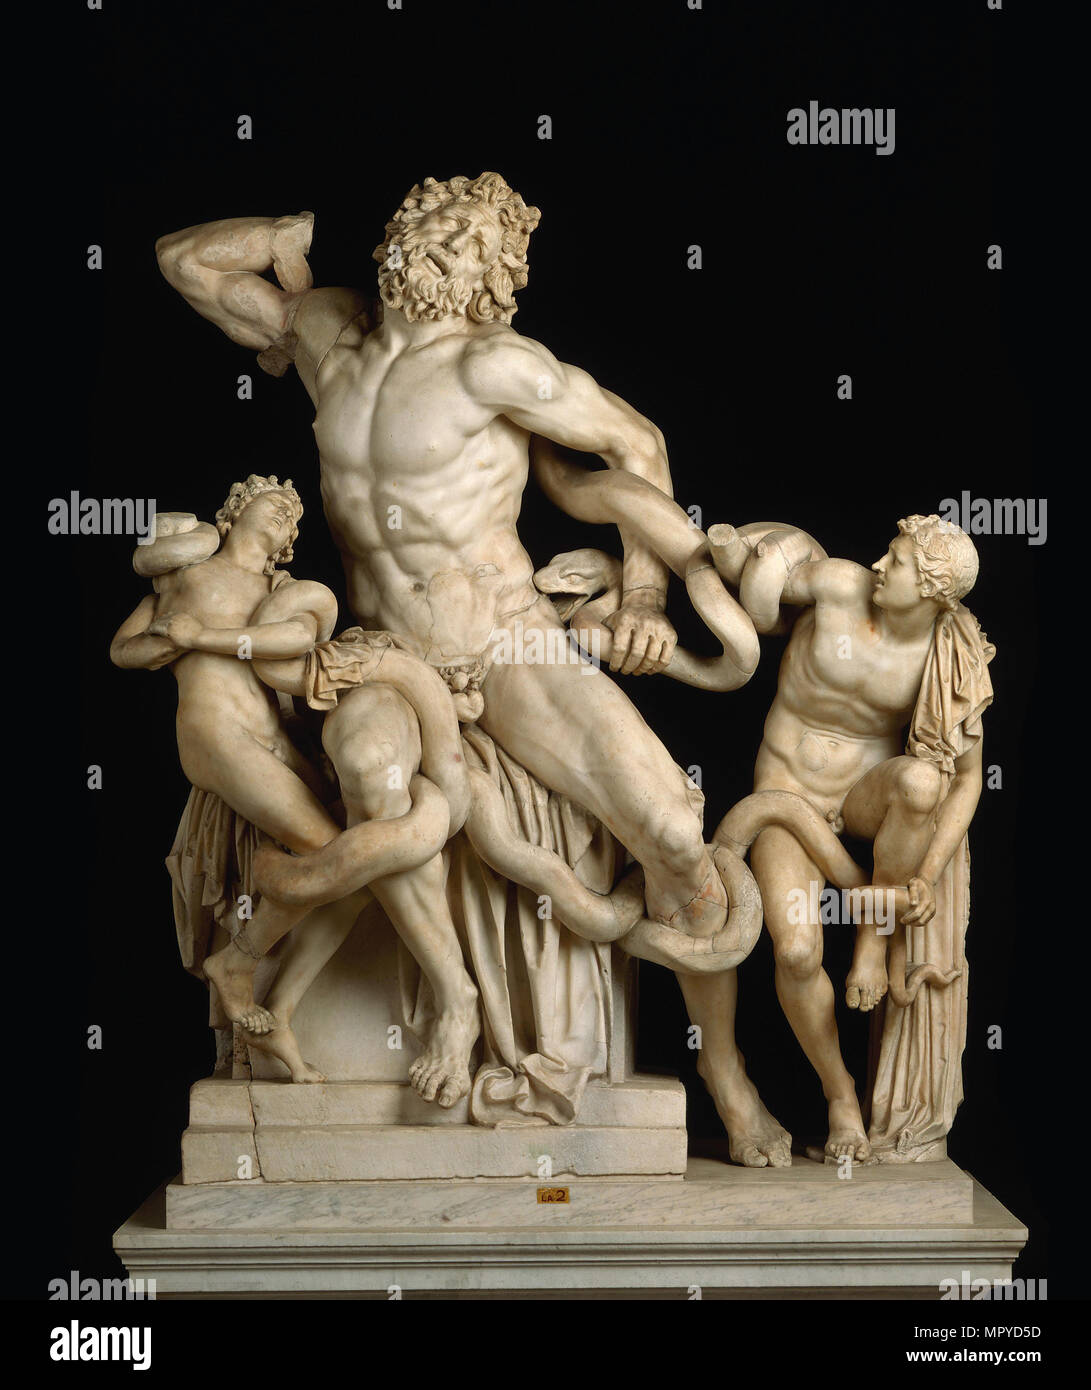 Laocoön and his sons (The Laocoön Group), 1st century BC. Stock Photo